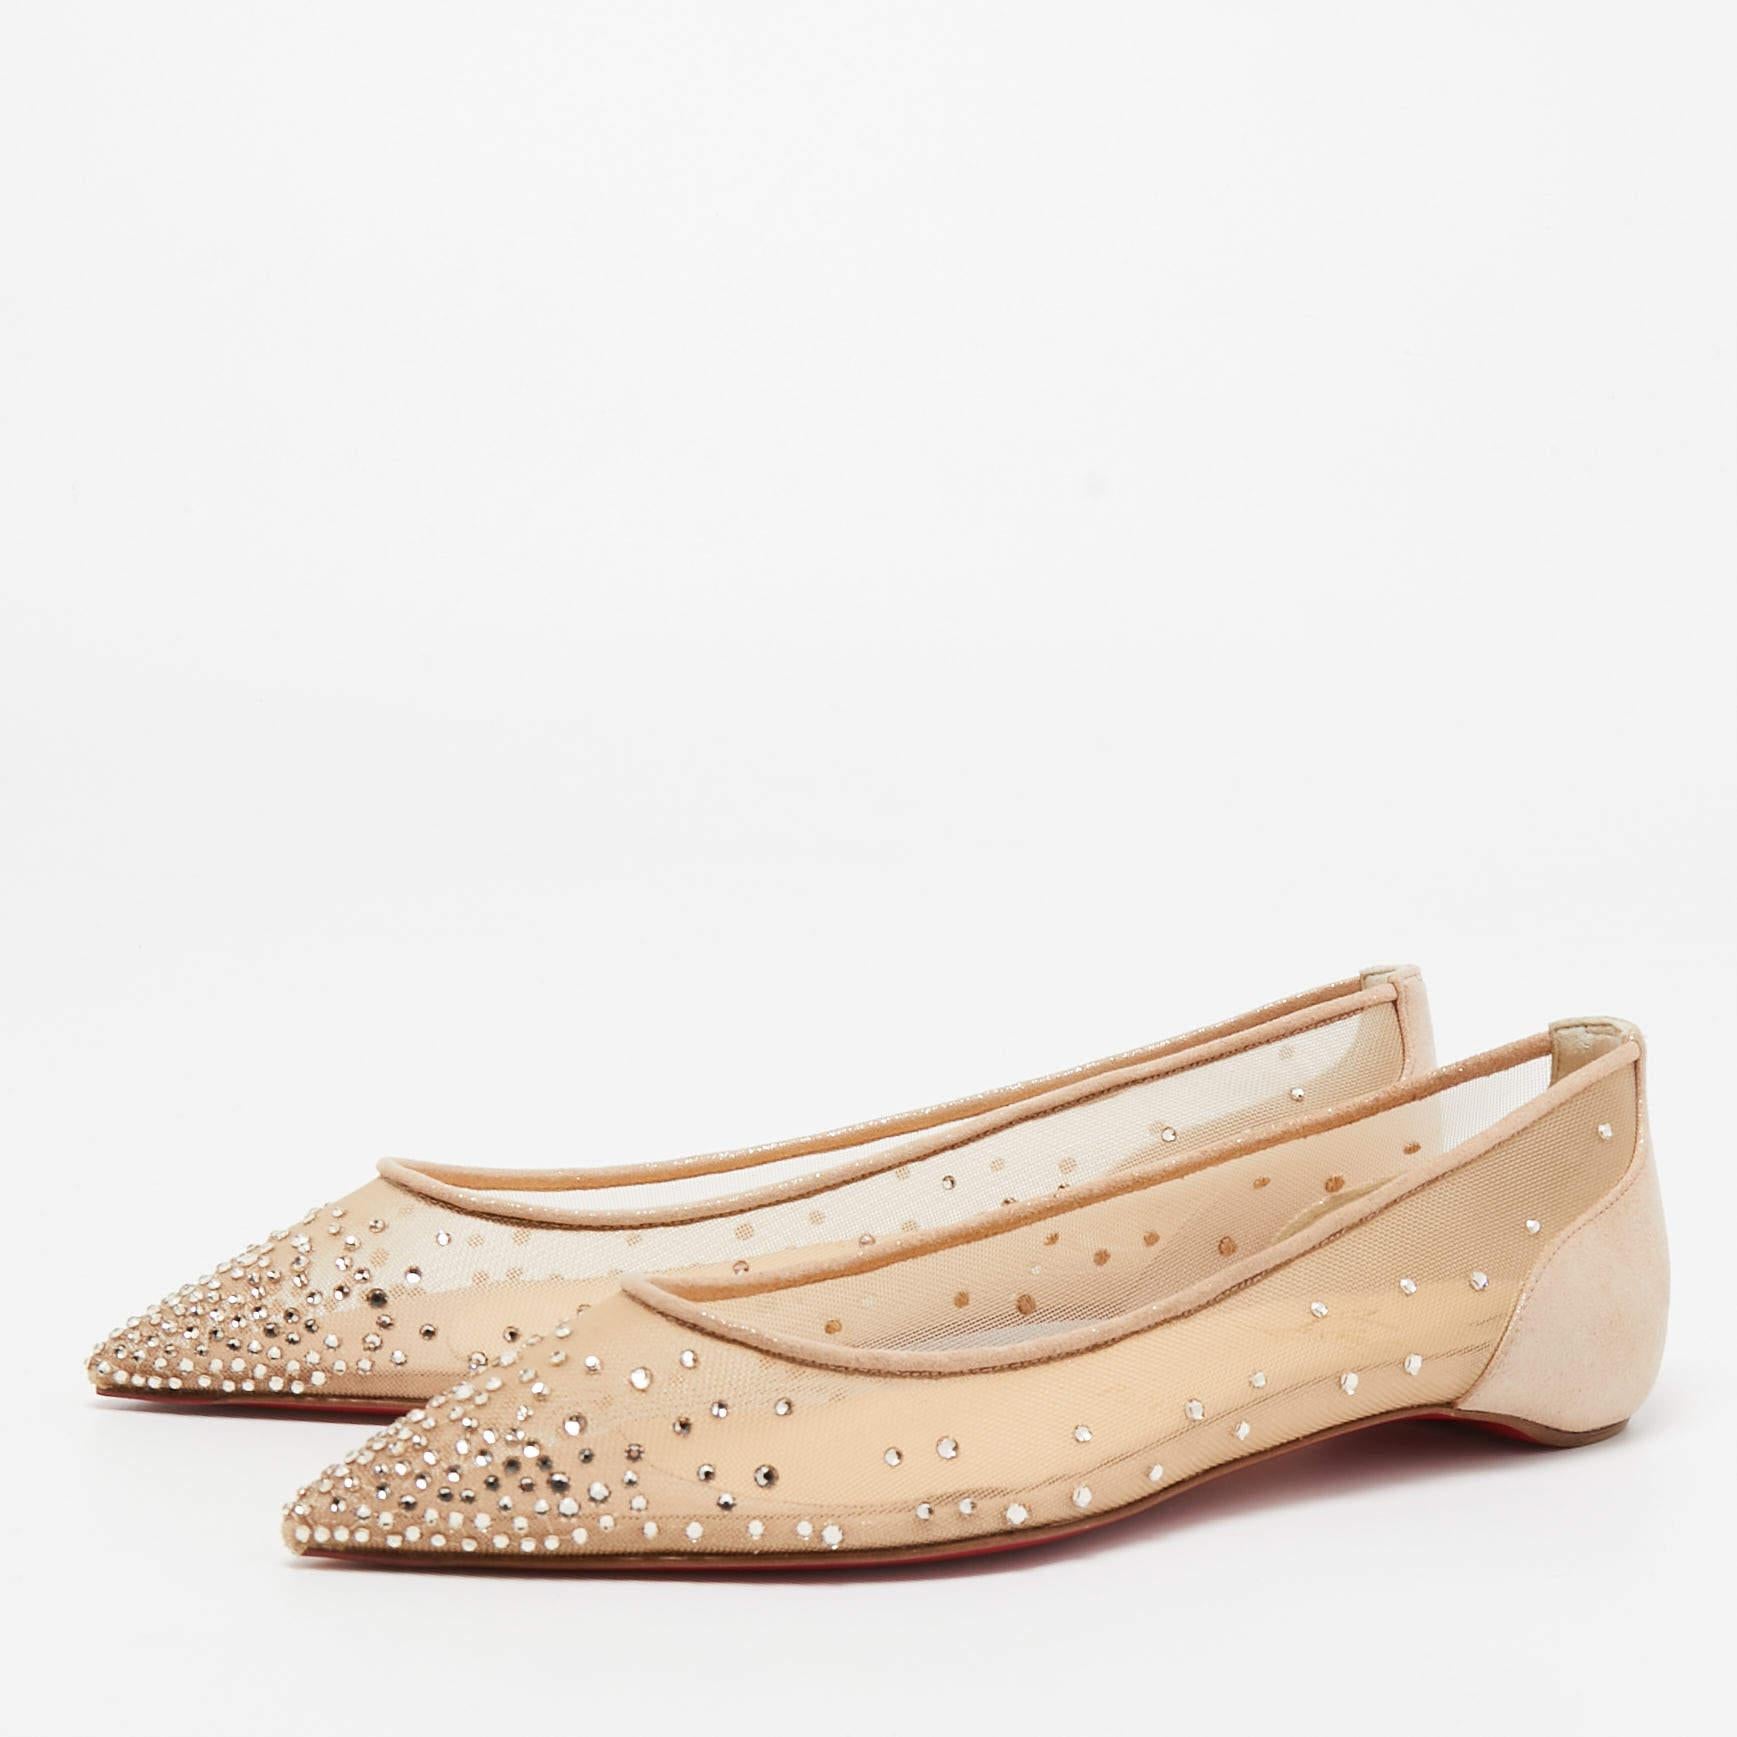 Christian Louboutin Beige Mesh and Suede Follies Strass Ballet Flats Size 38 For Sale 1